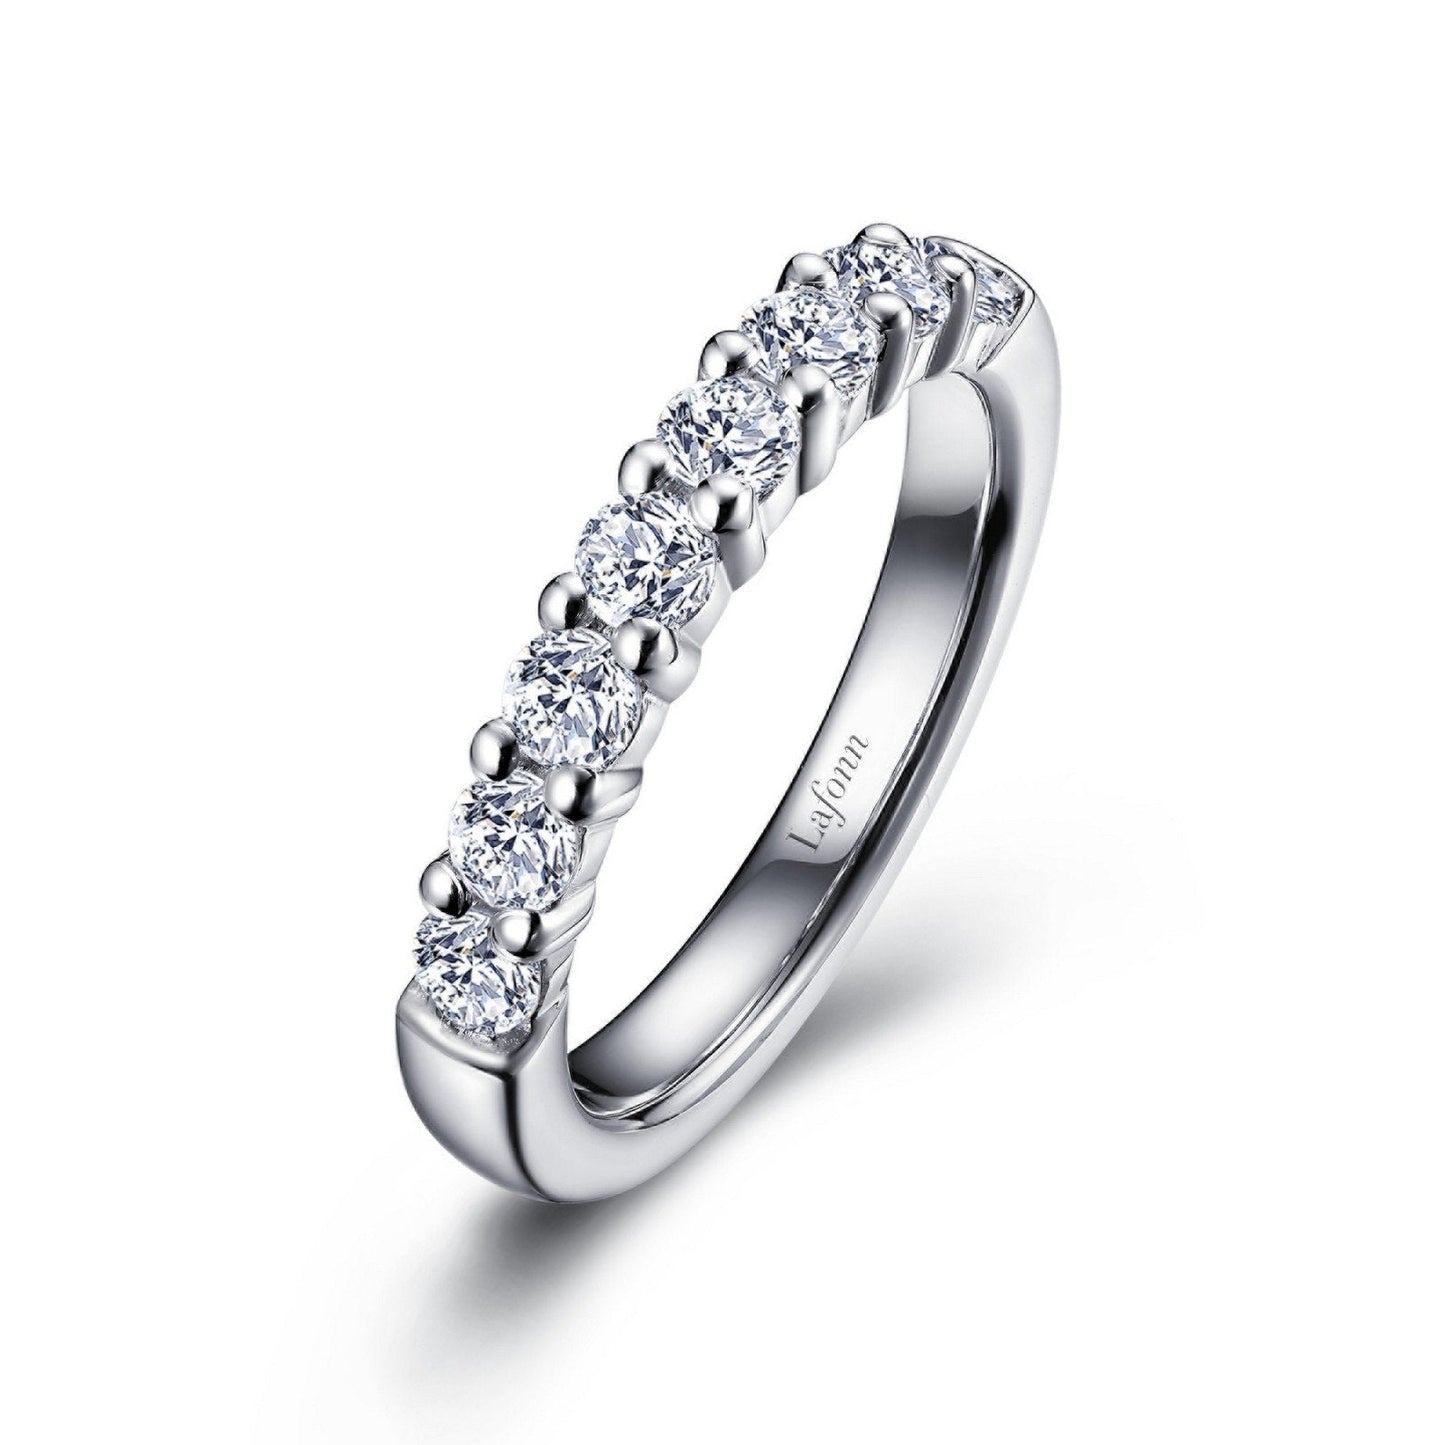 Load image into Gallery viewer, Lafonn 1 CTW Half-Eternity Band Simulated Diamond RINGS Size 10 Platinum 1 CTS Approx. 3.0mm (W)
